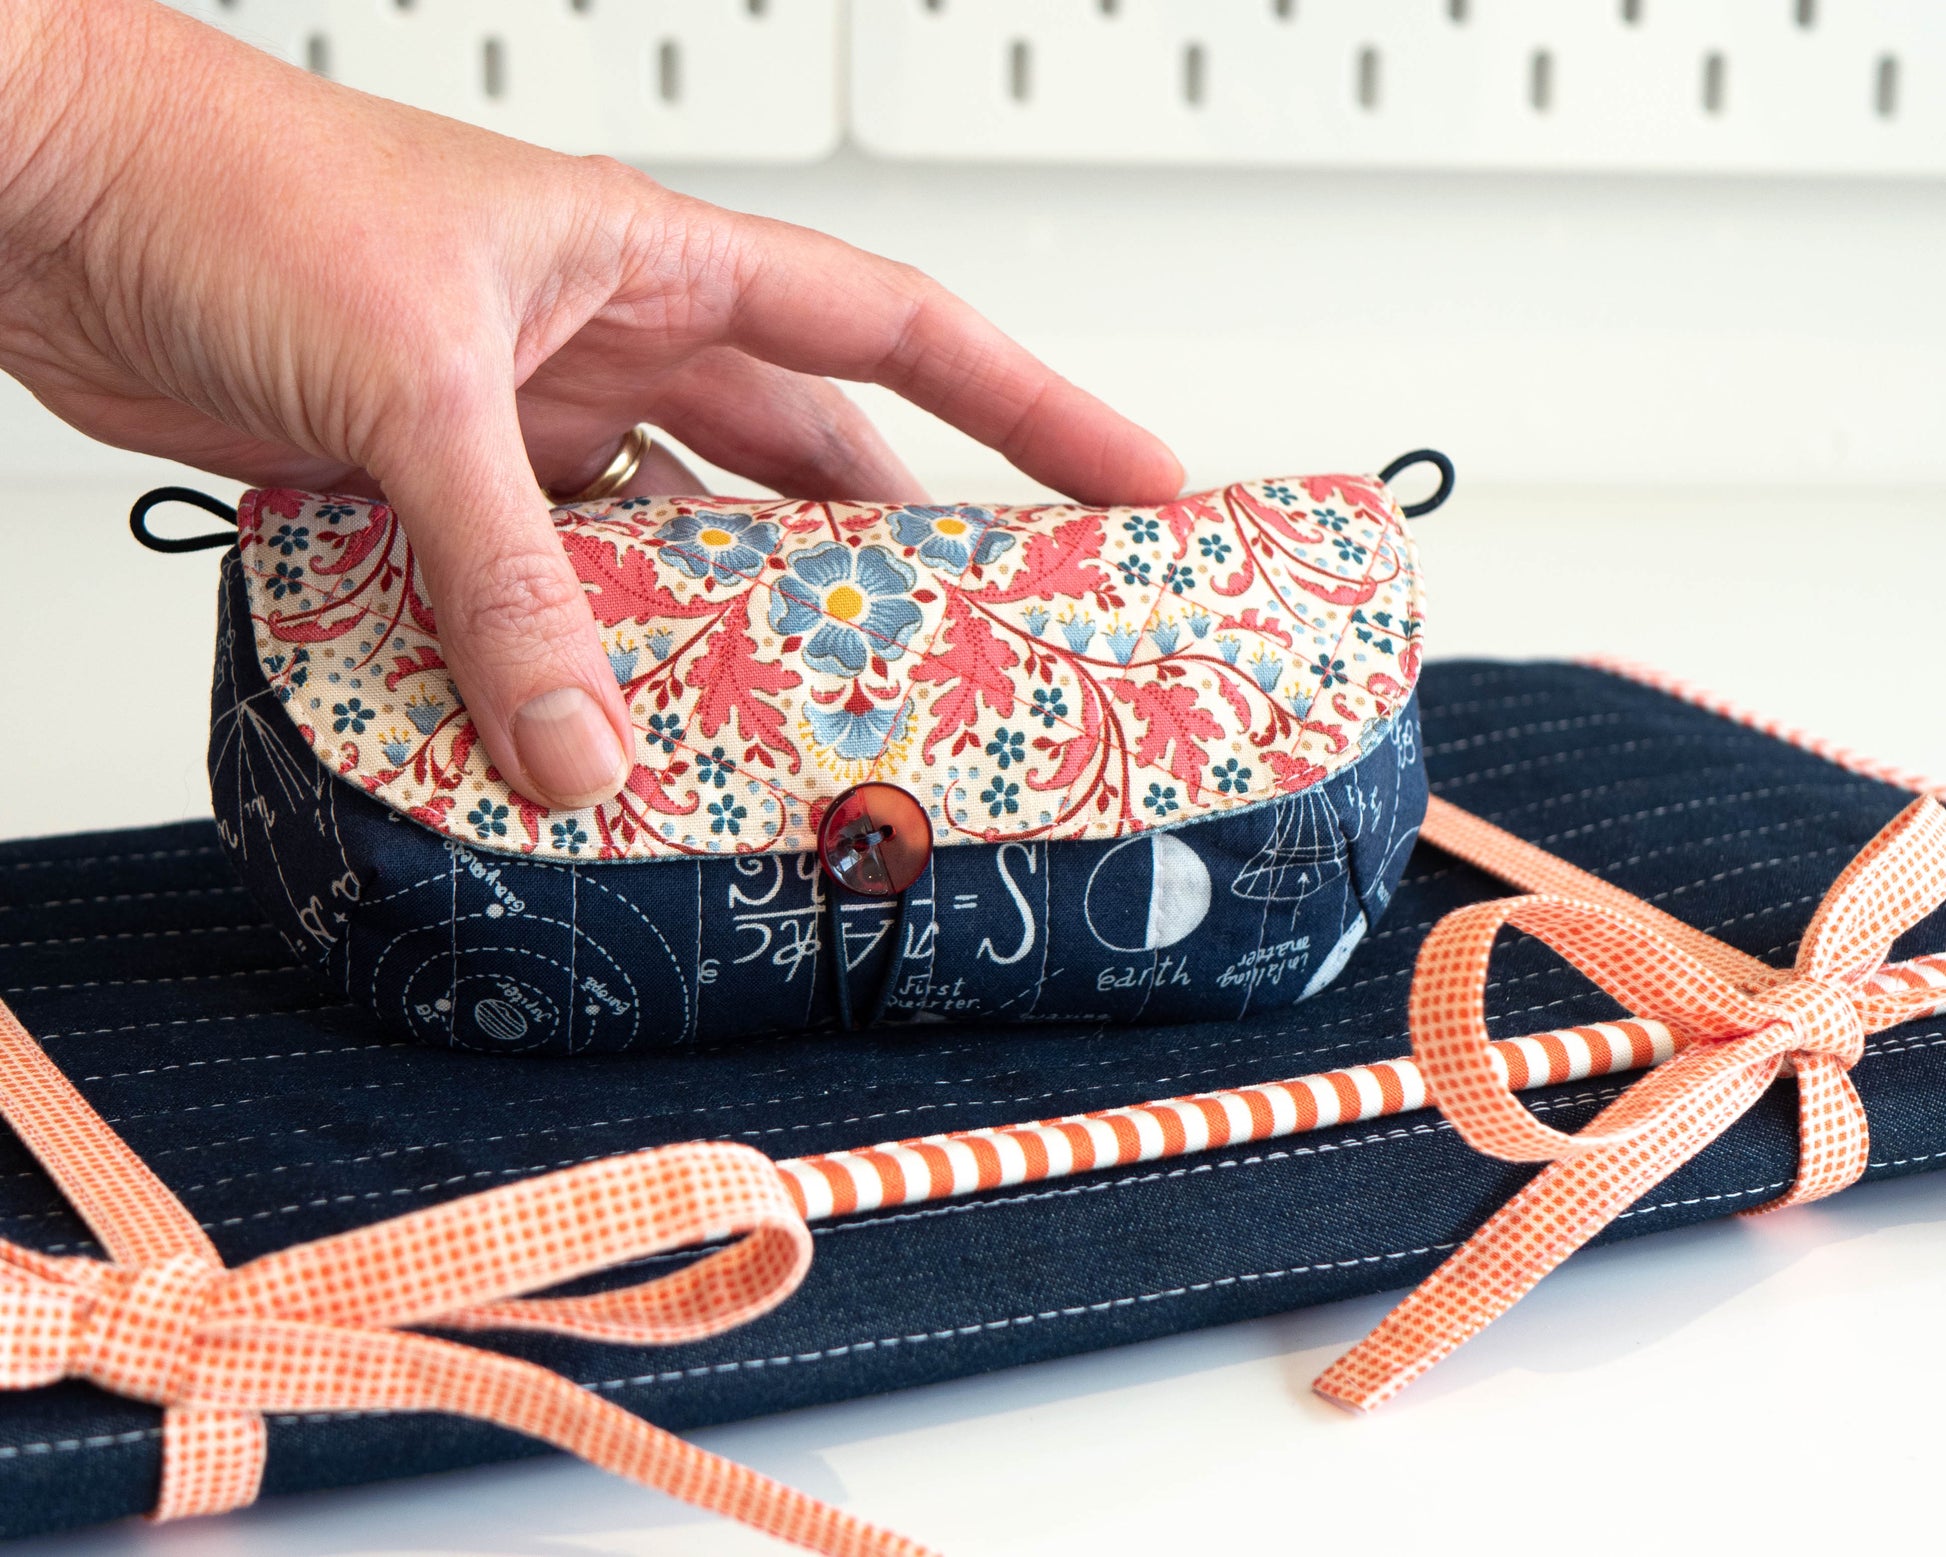 Meet the Sewing Space Station: The Ultimate Sewing Organiser